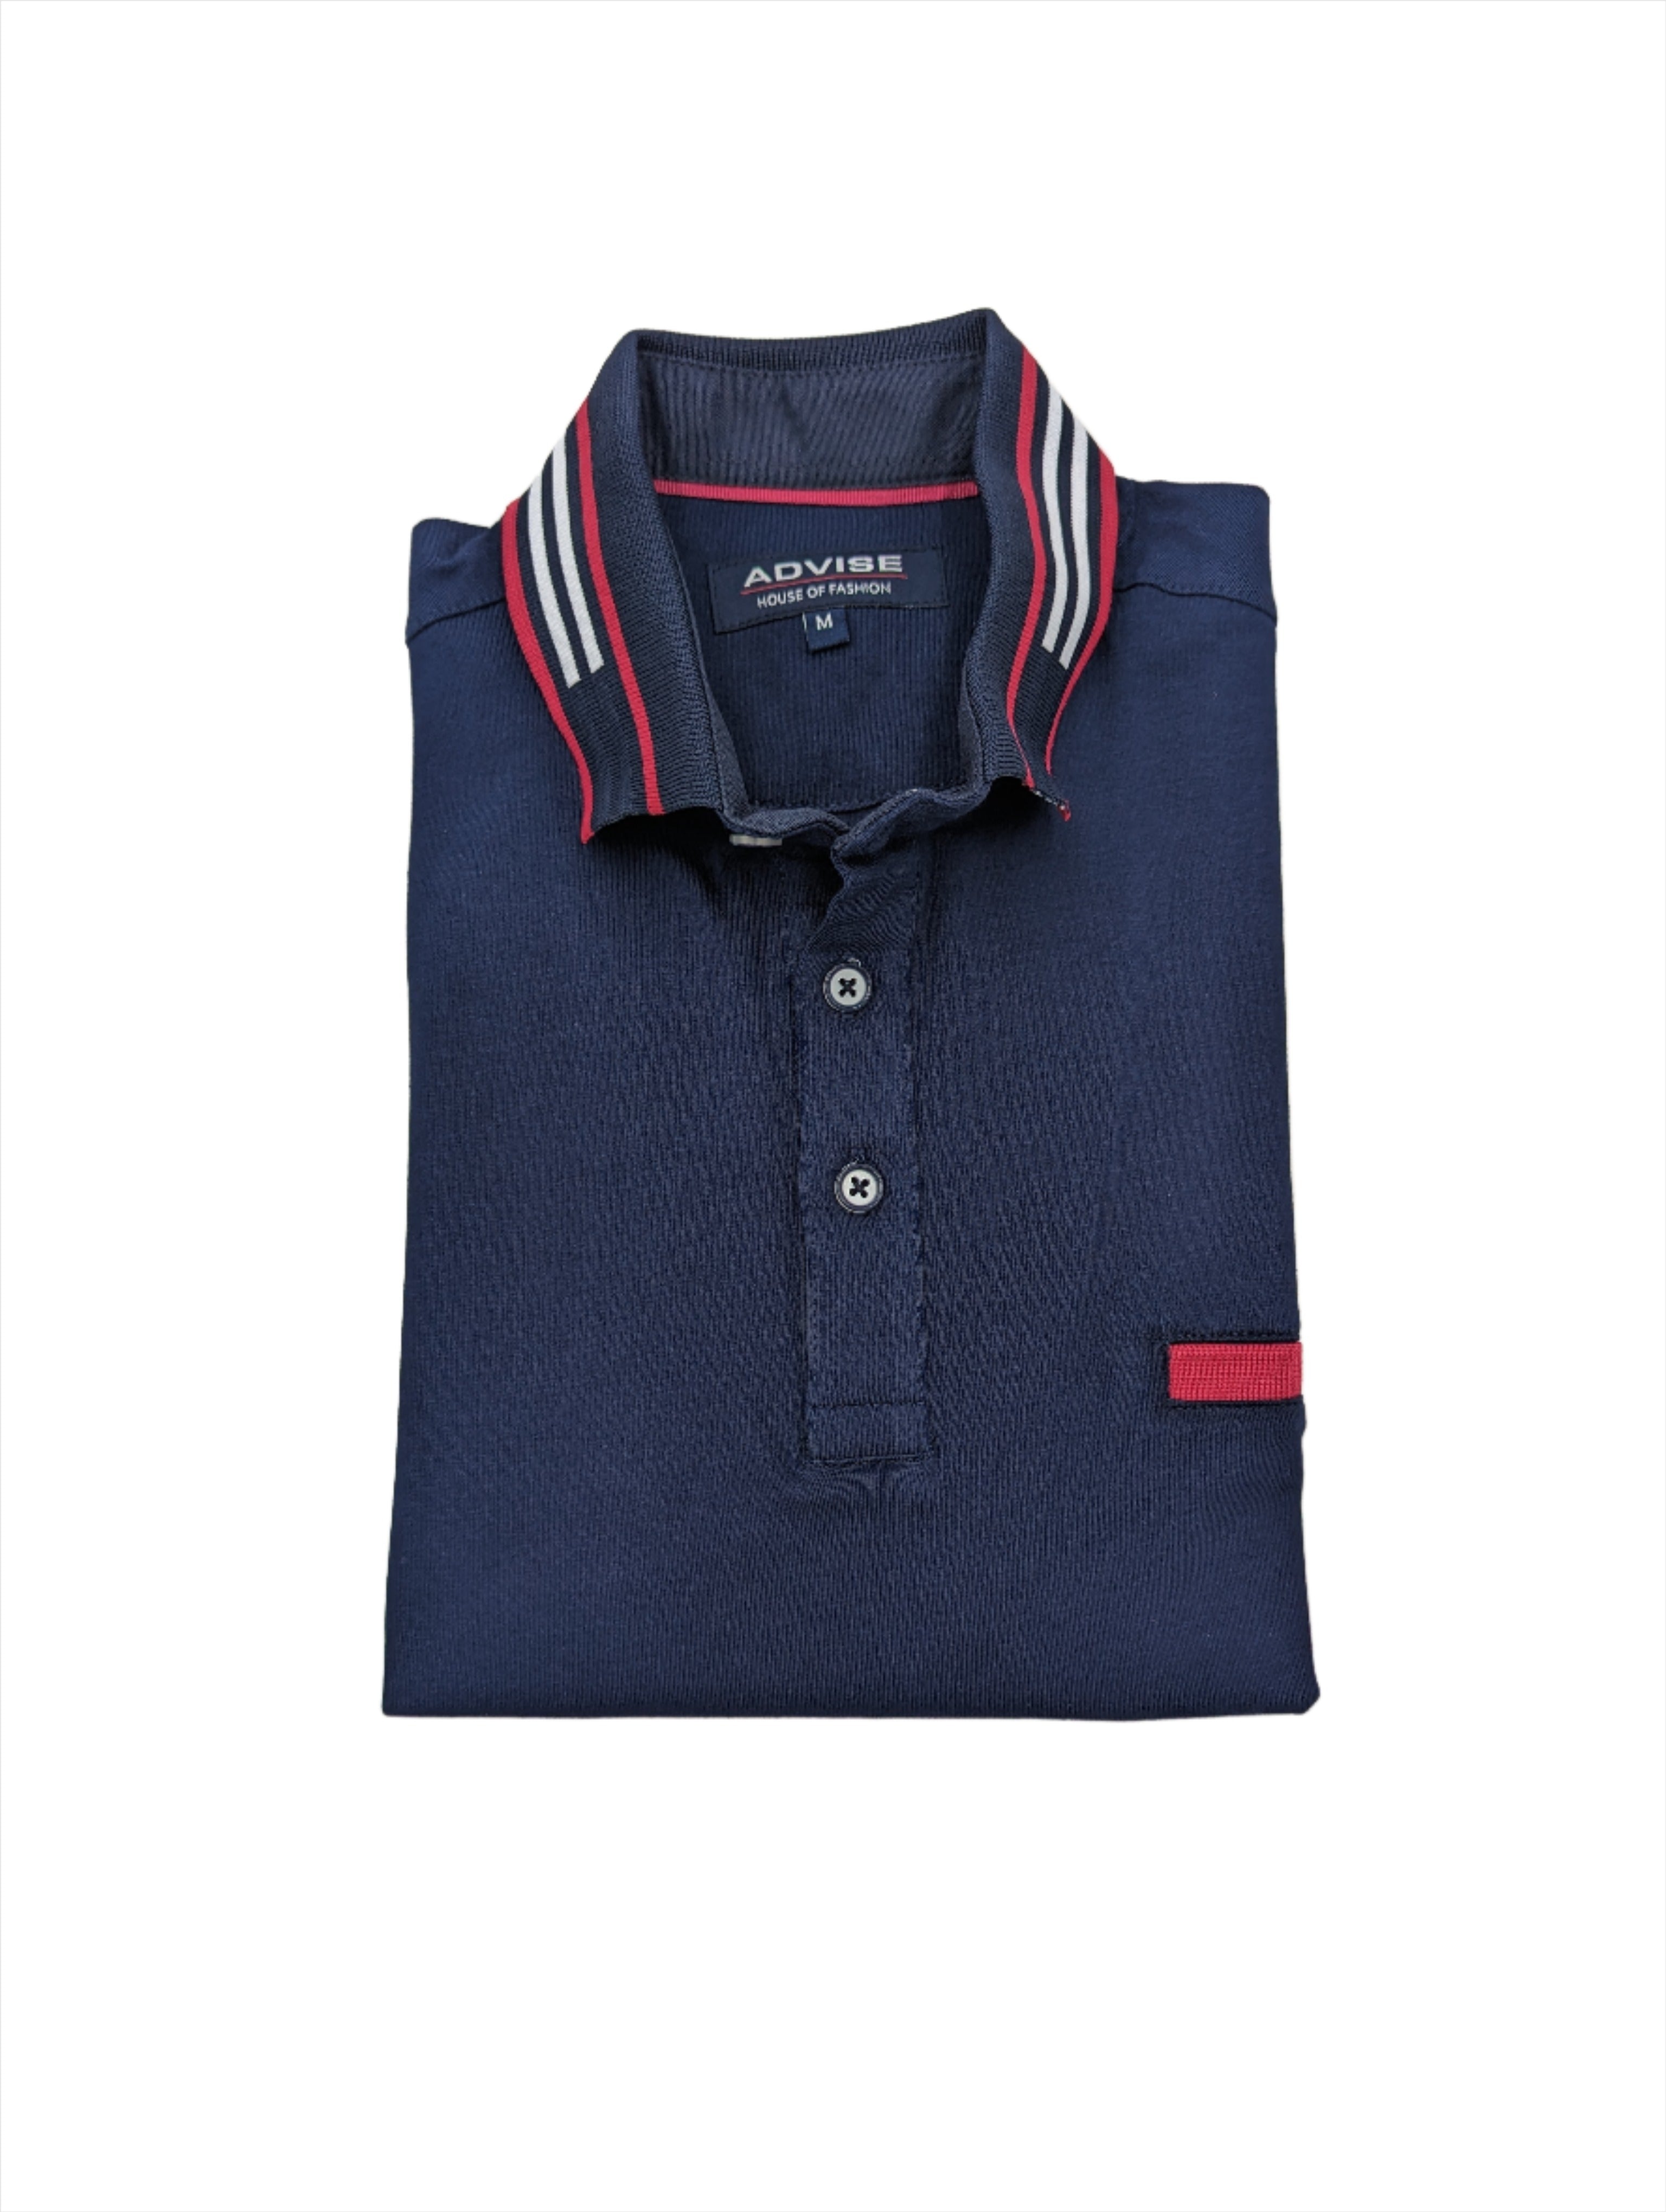 Advise  Navy Polo Shirt with red & white tipping-Front view